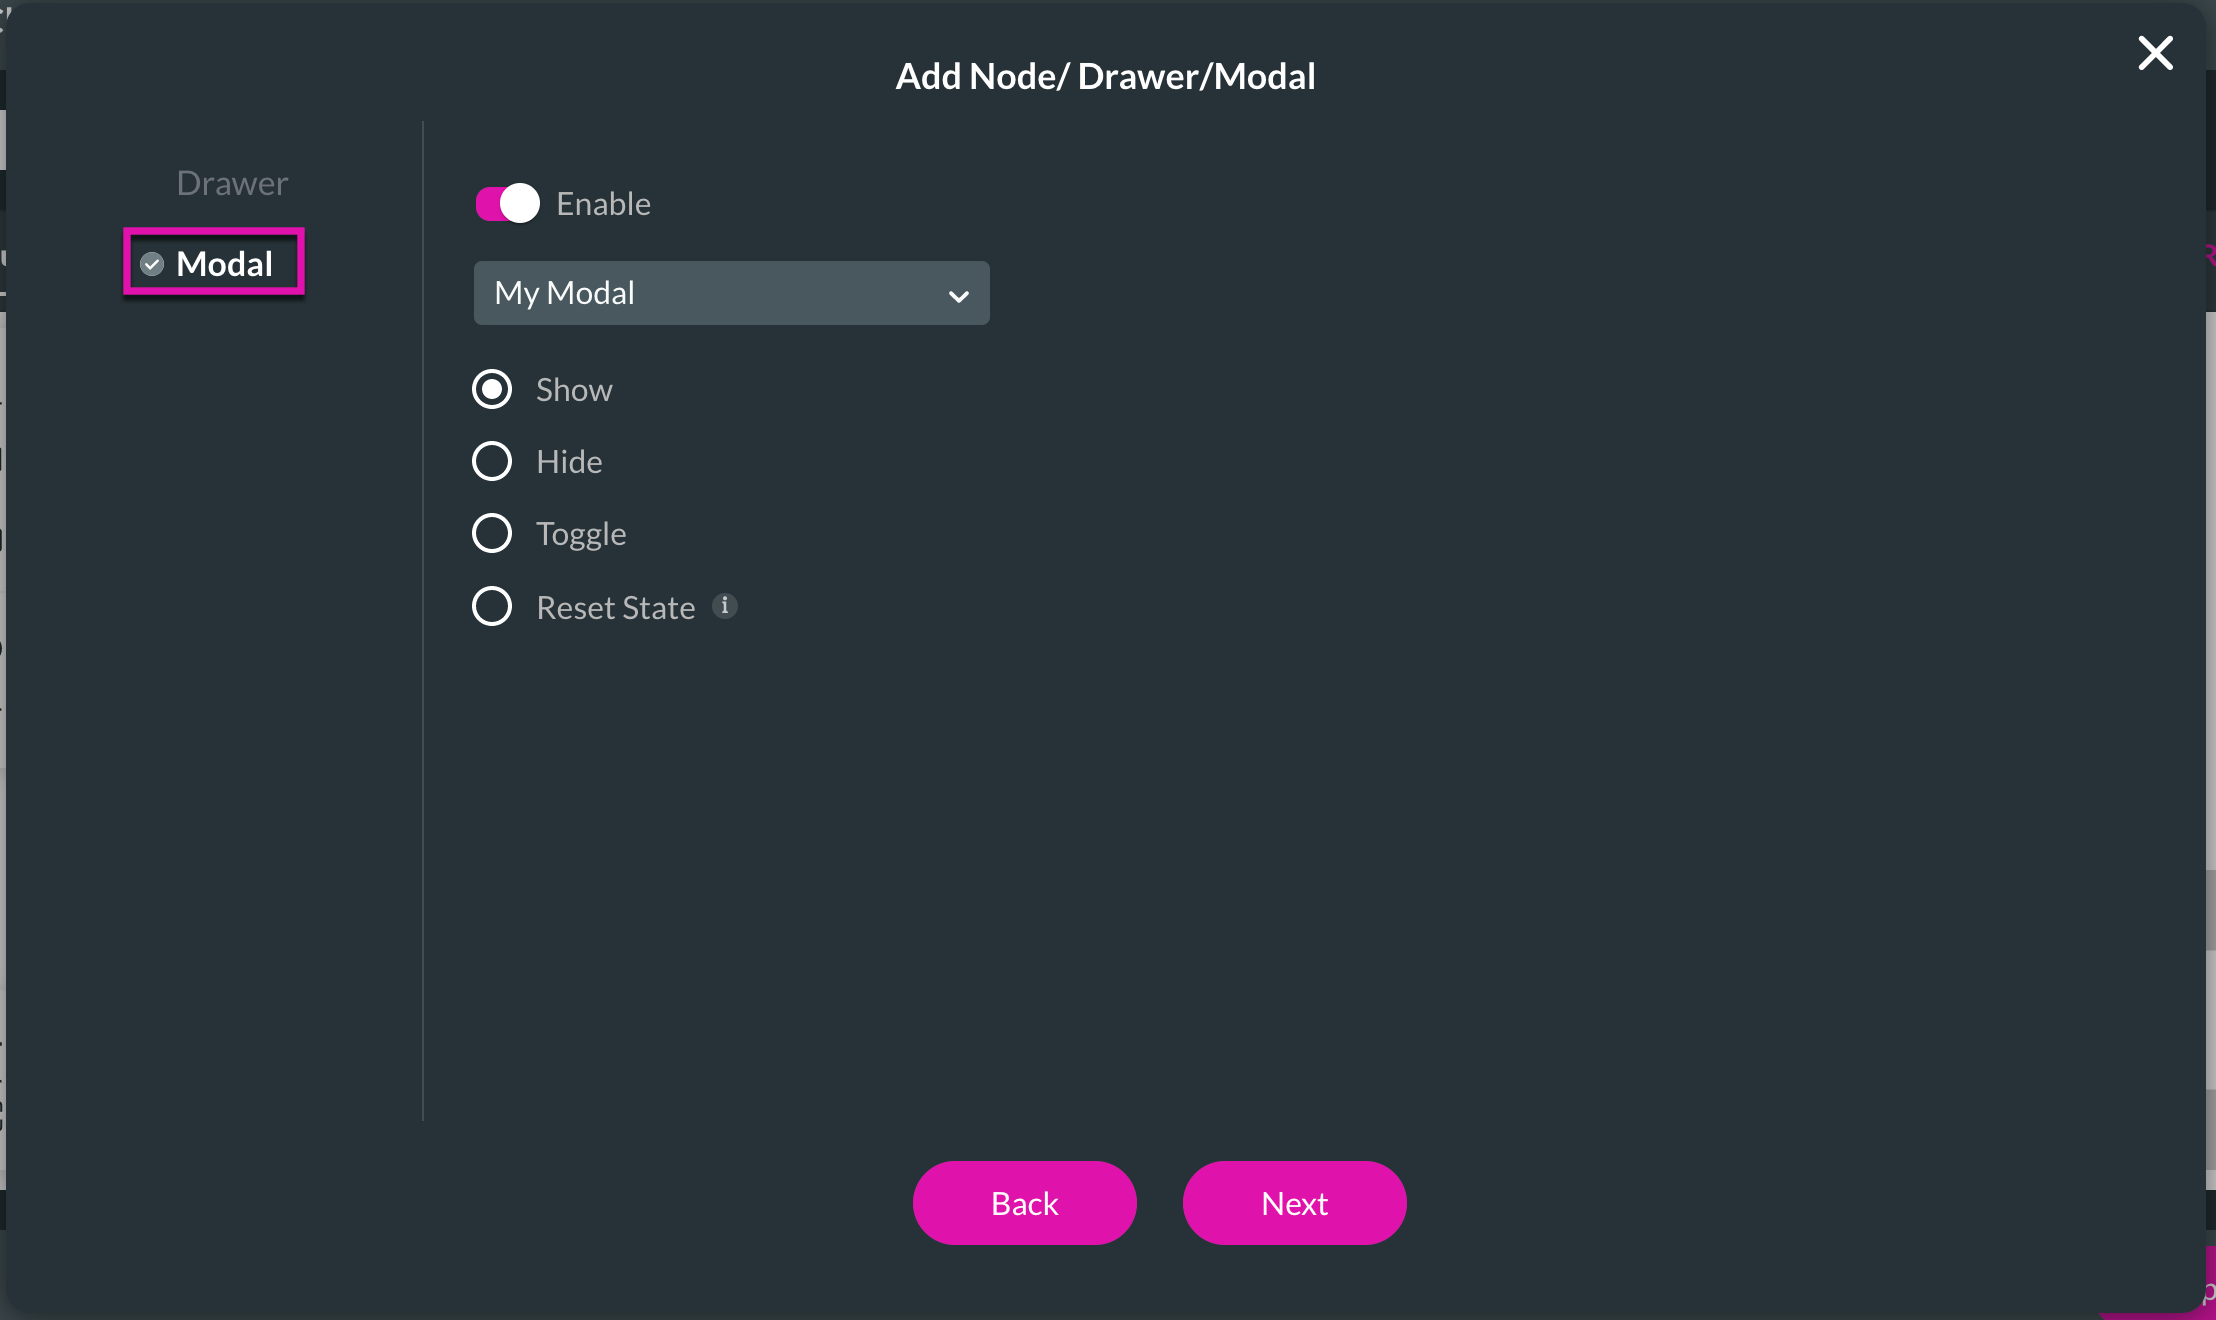 Screenshot of Add Node Drawer Modal window showing how to configure modal to show 